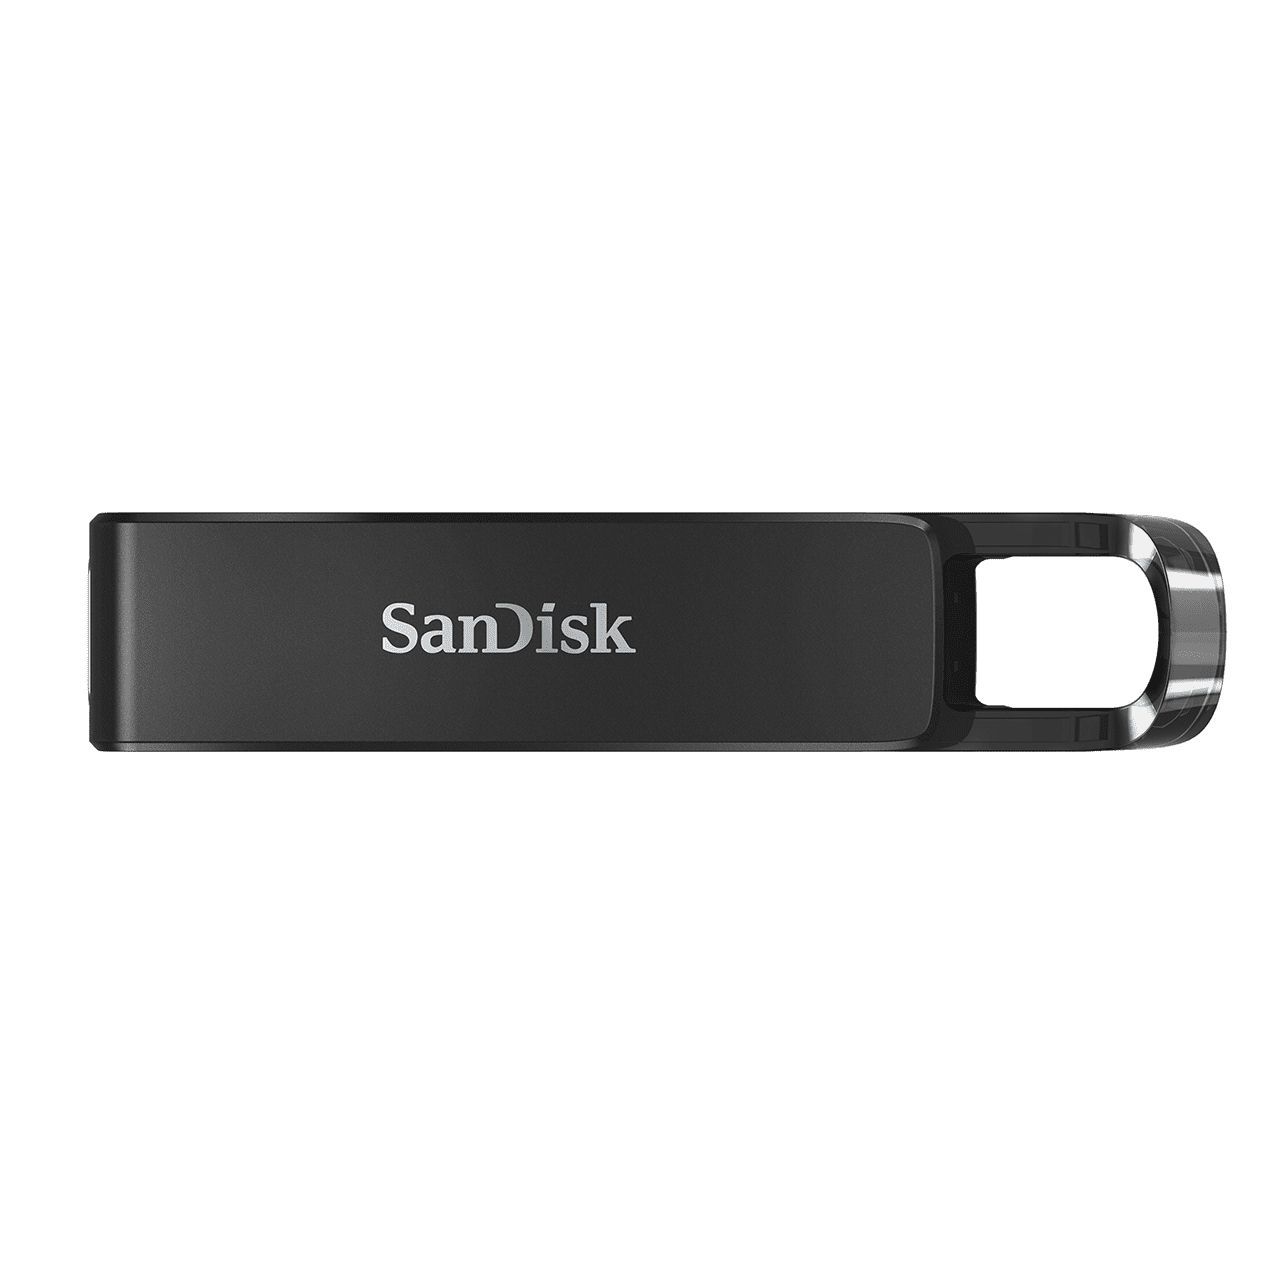 SDCZ460-64G-G46 - Pendrive SANDISK Flash Drive 64Gb USB-C 3.0 Lectura 150 Mb/s Negro (SDCZ460-64G-G46)